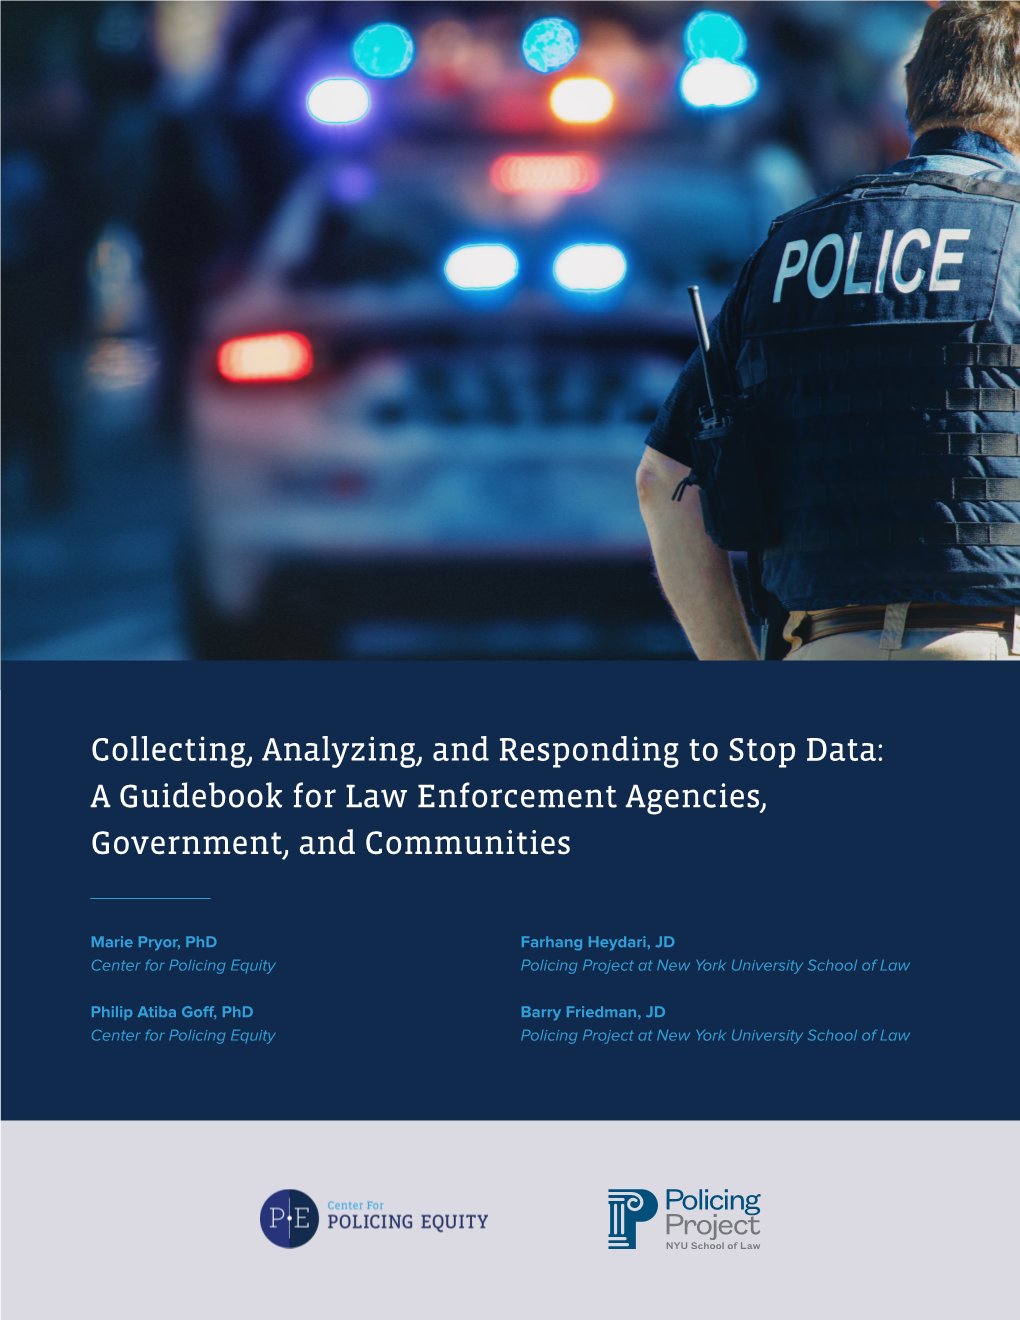 Collecting, Analyzing, and Responding to Stop Data: a Guidebook for Law Enforcement Agencies, Government, and Communities